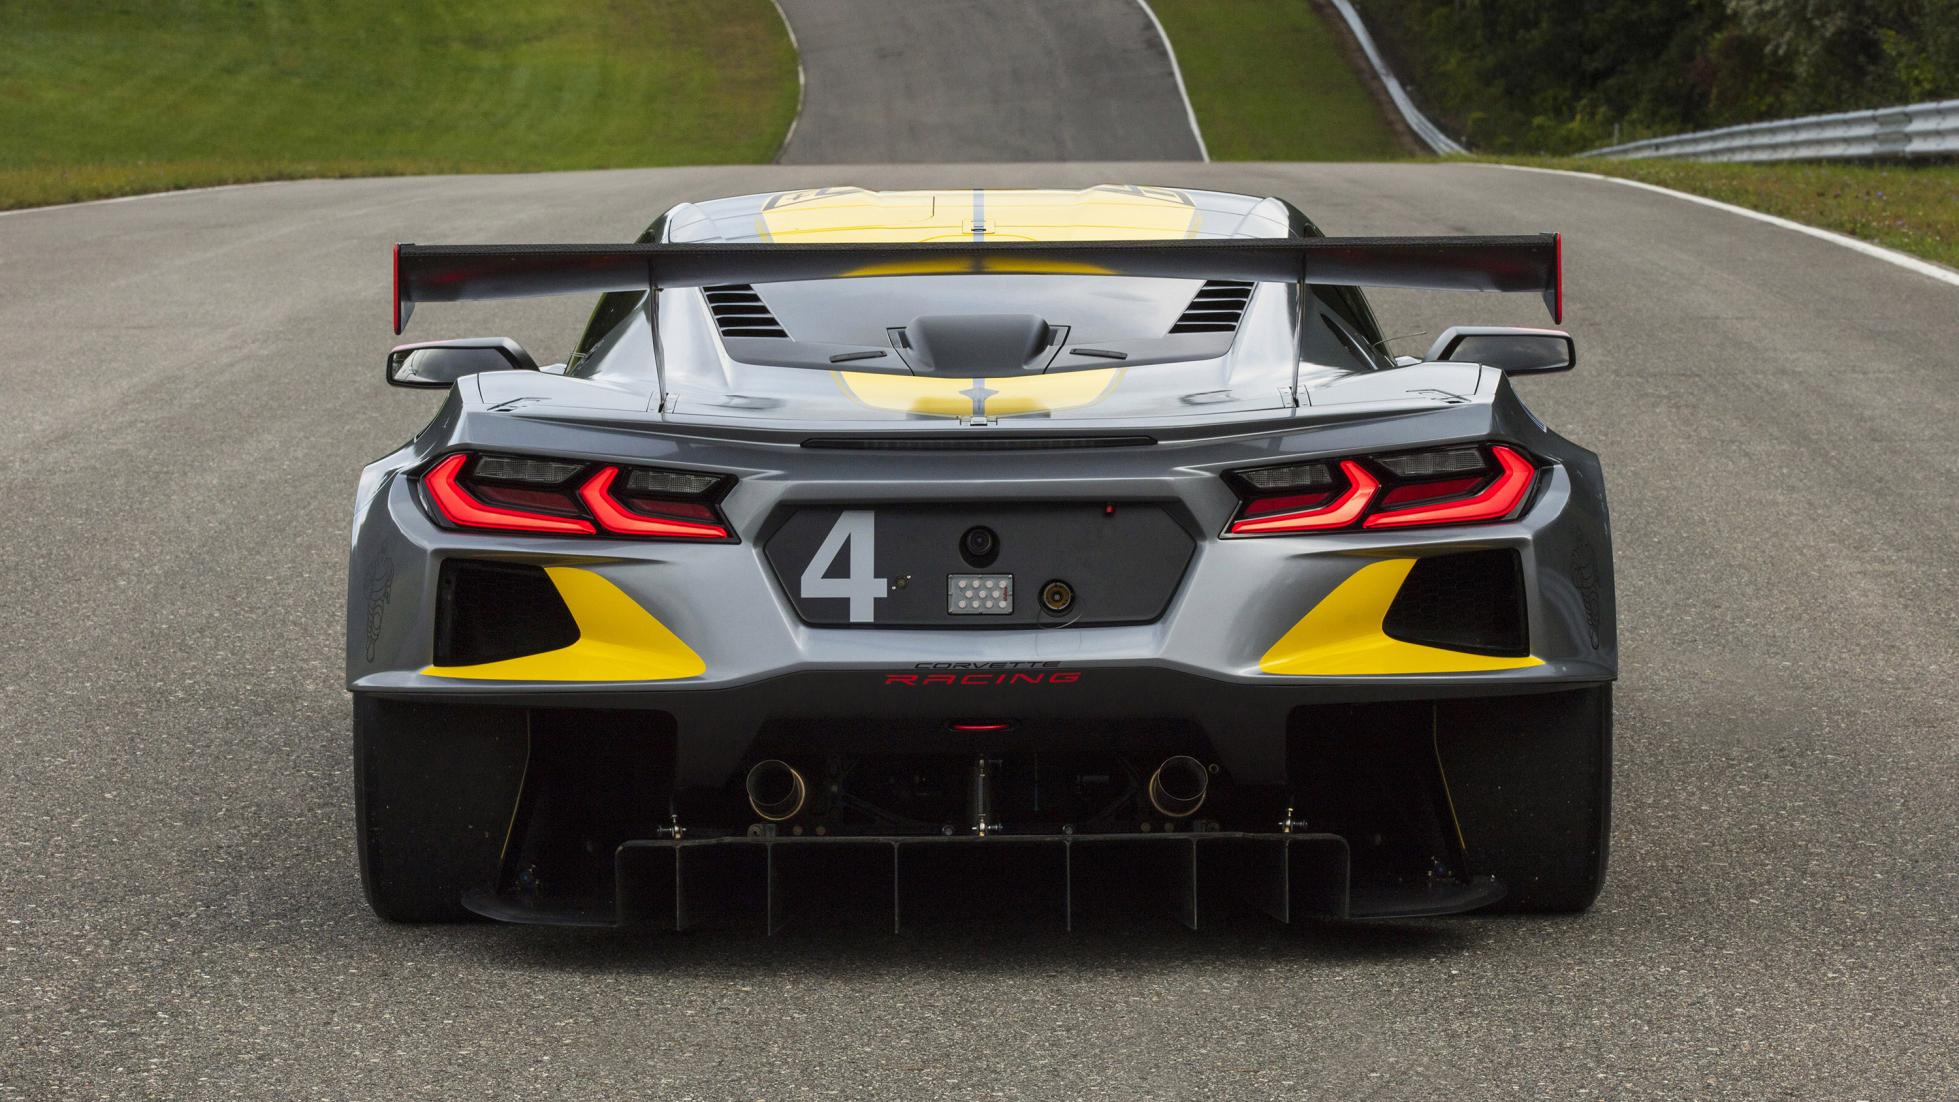 The Corvette C8.R will keep you awake at Le Mans next year